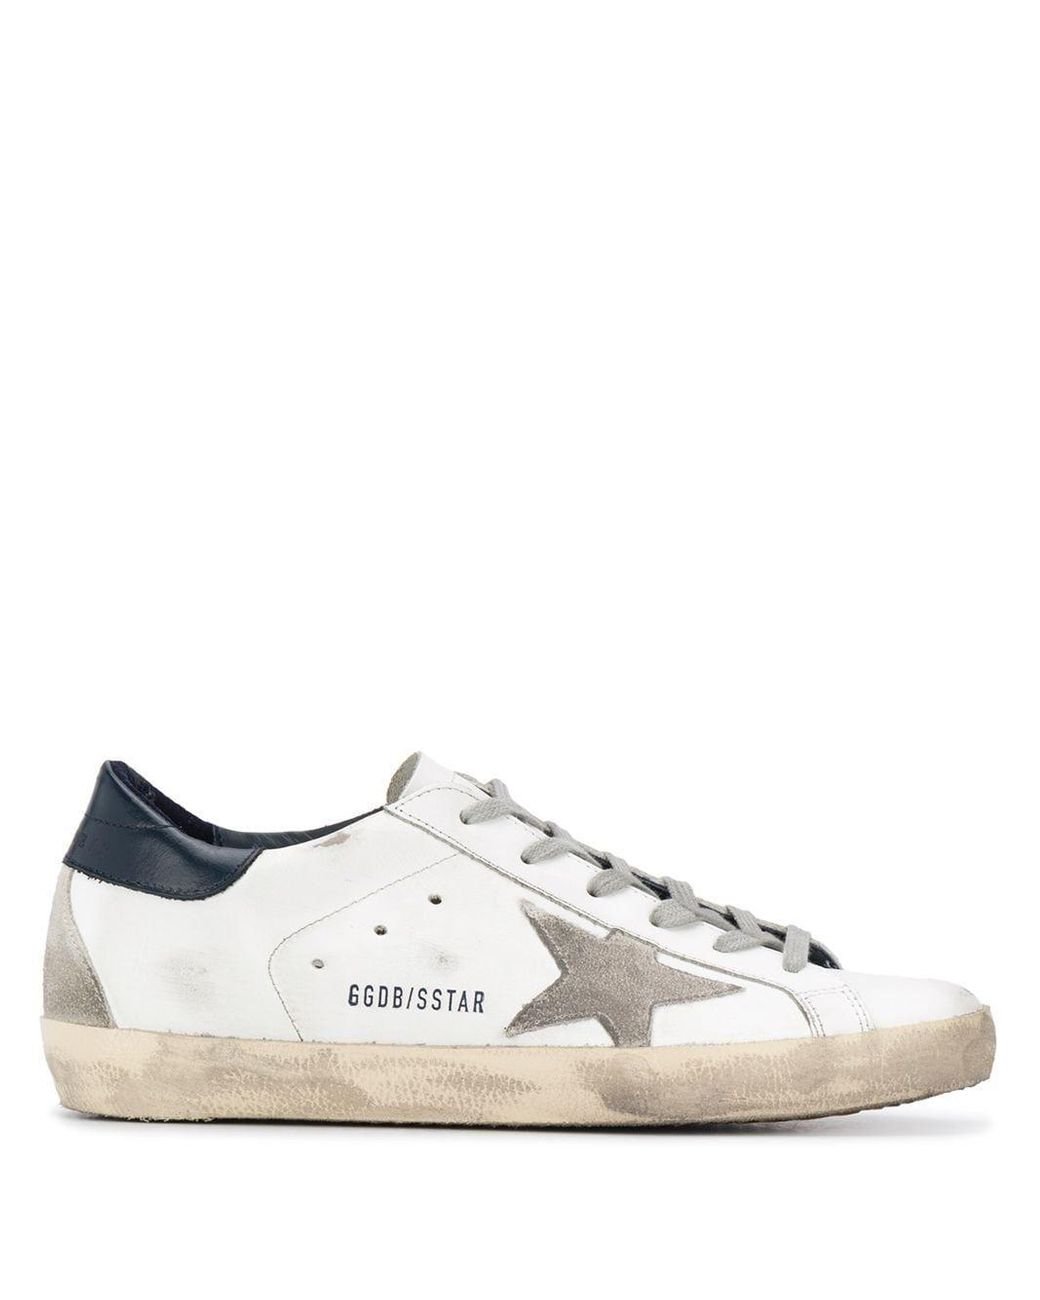 Golden Goose Deluxe Brand Goose Leather Sneakers in White - Lyst